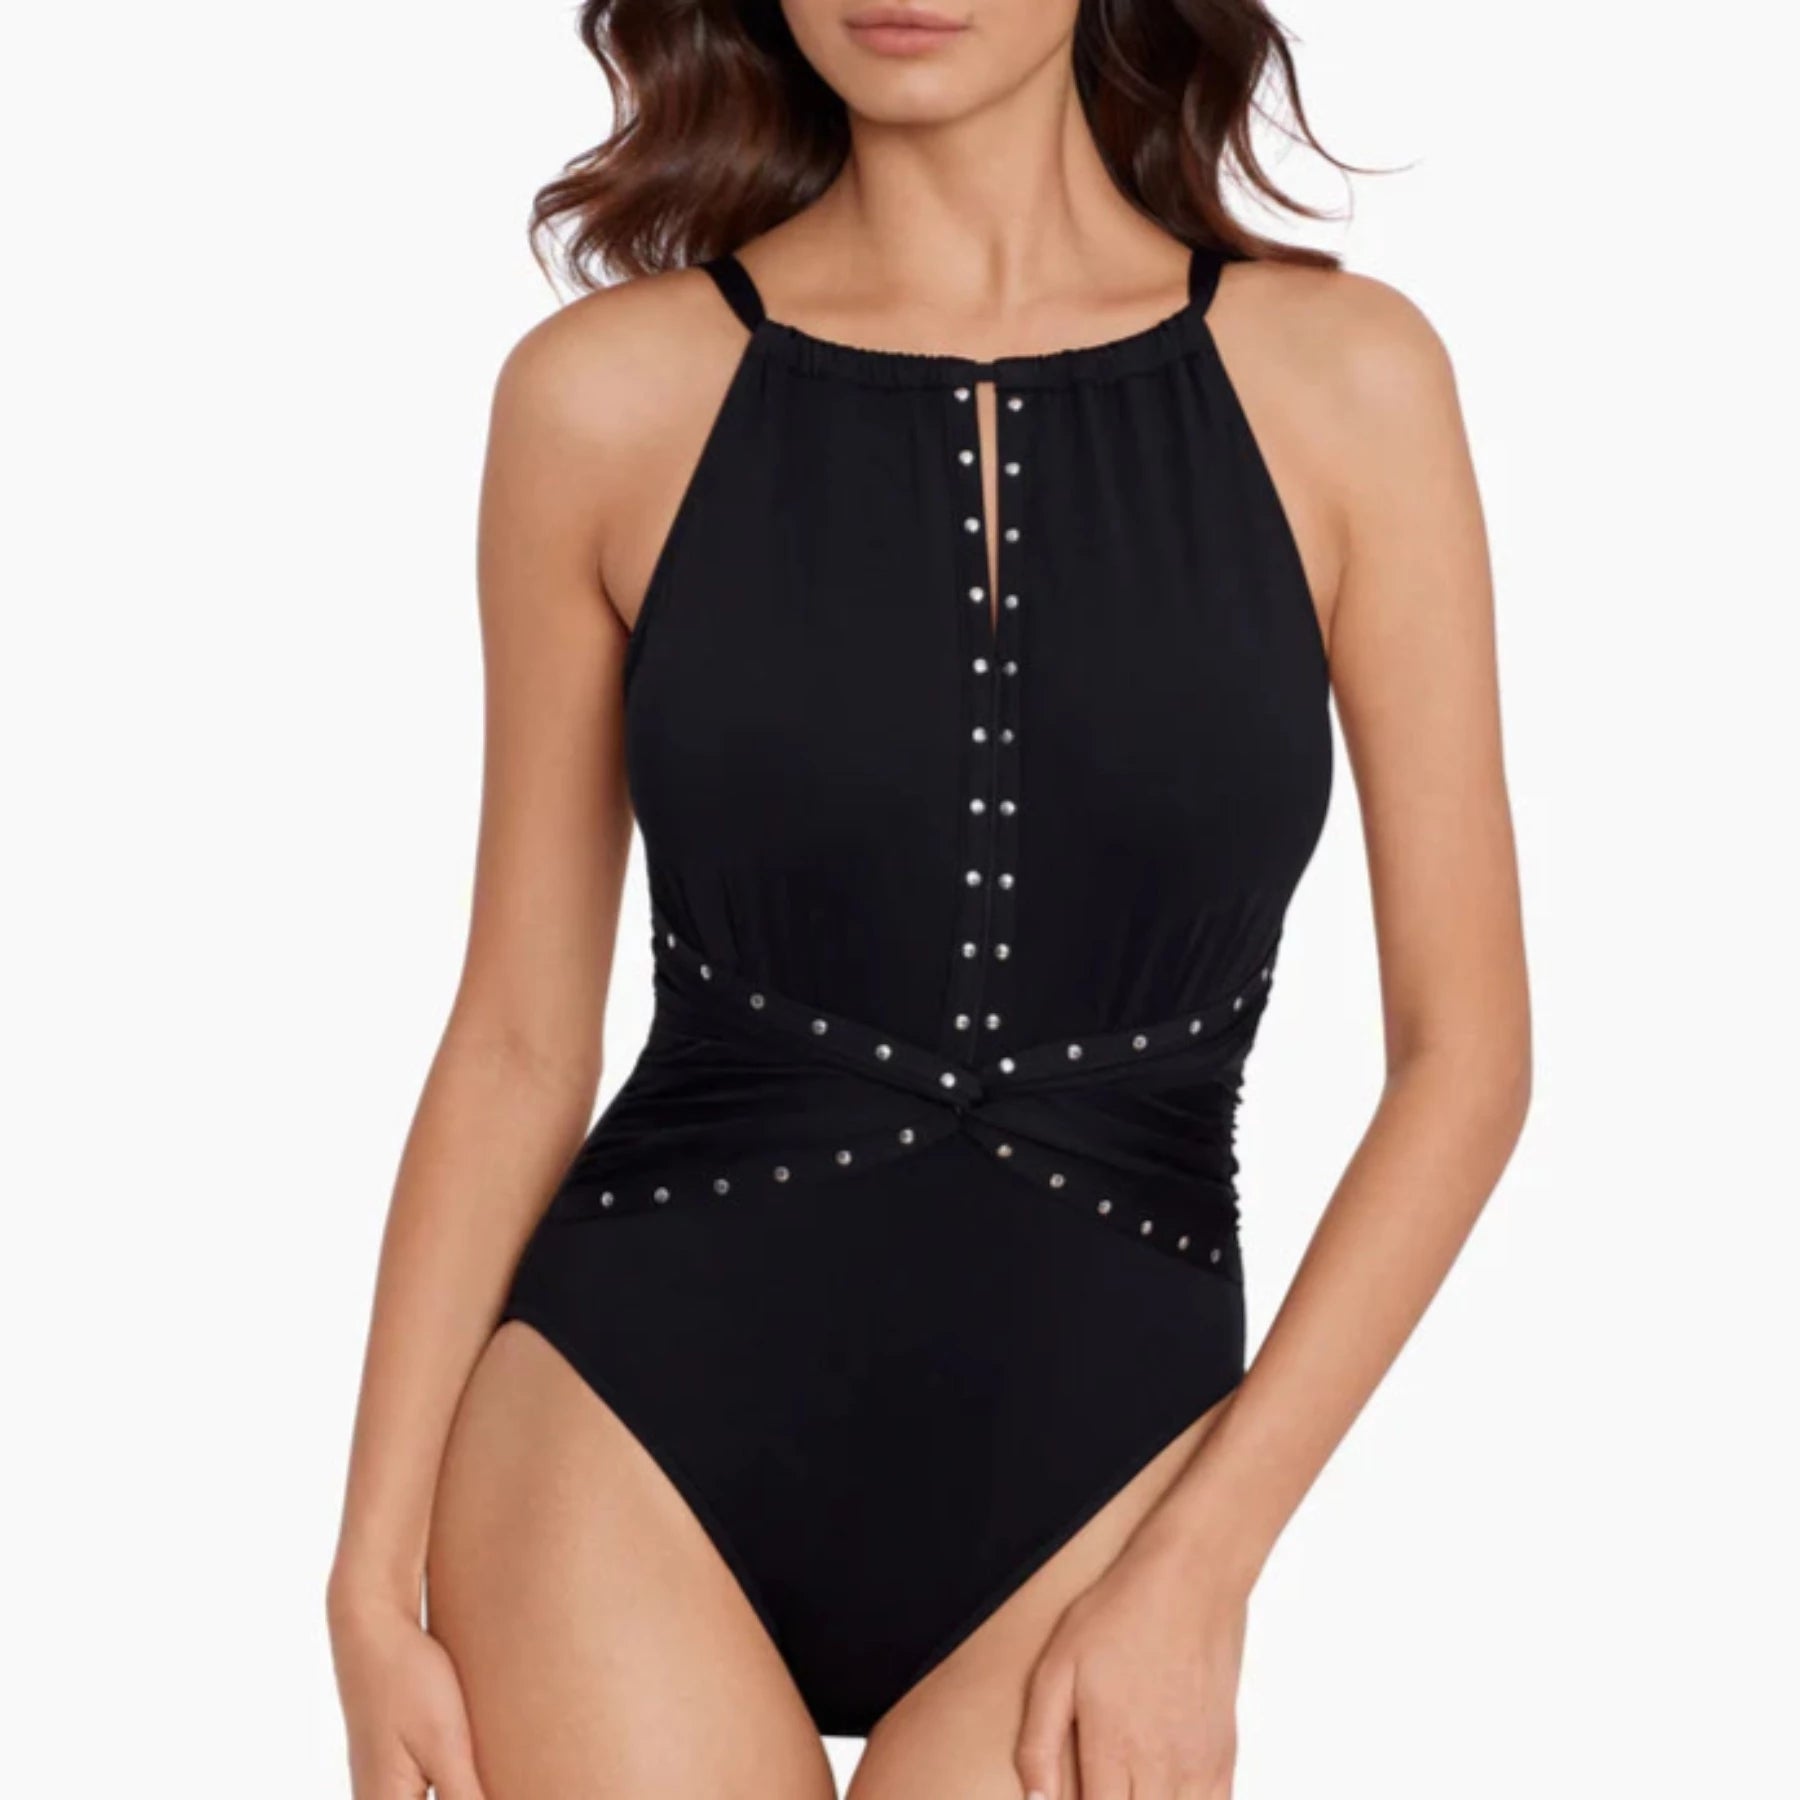 Riveted Diana One Piece Swimsuit 6017510 - Black